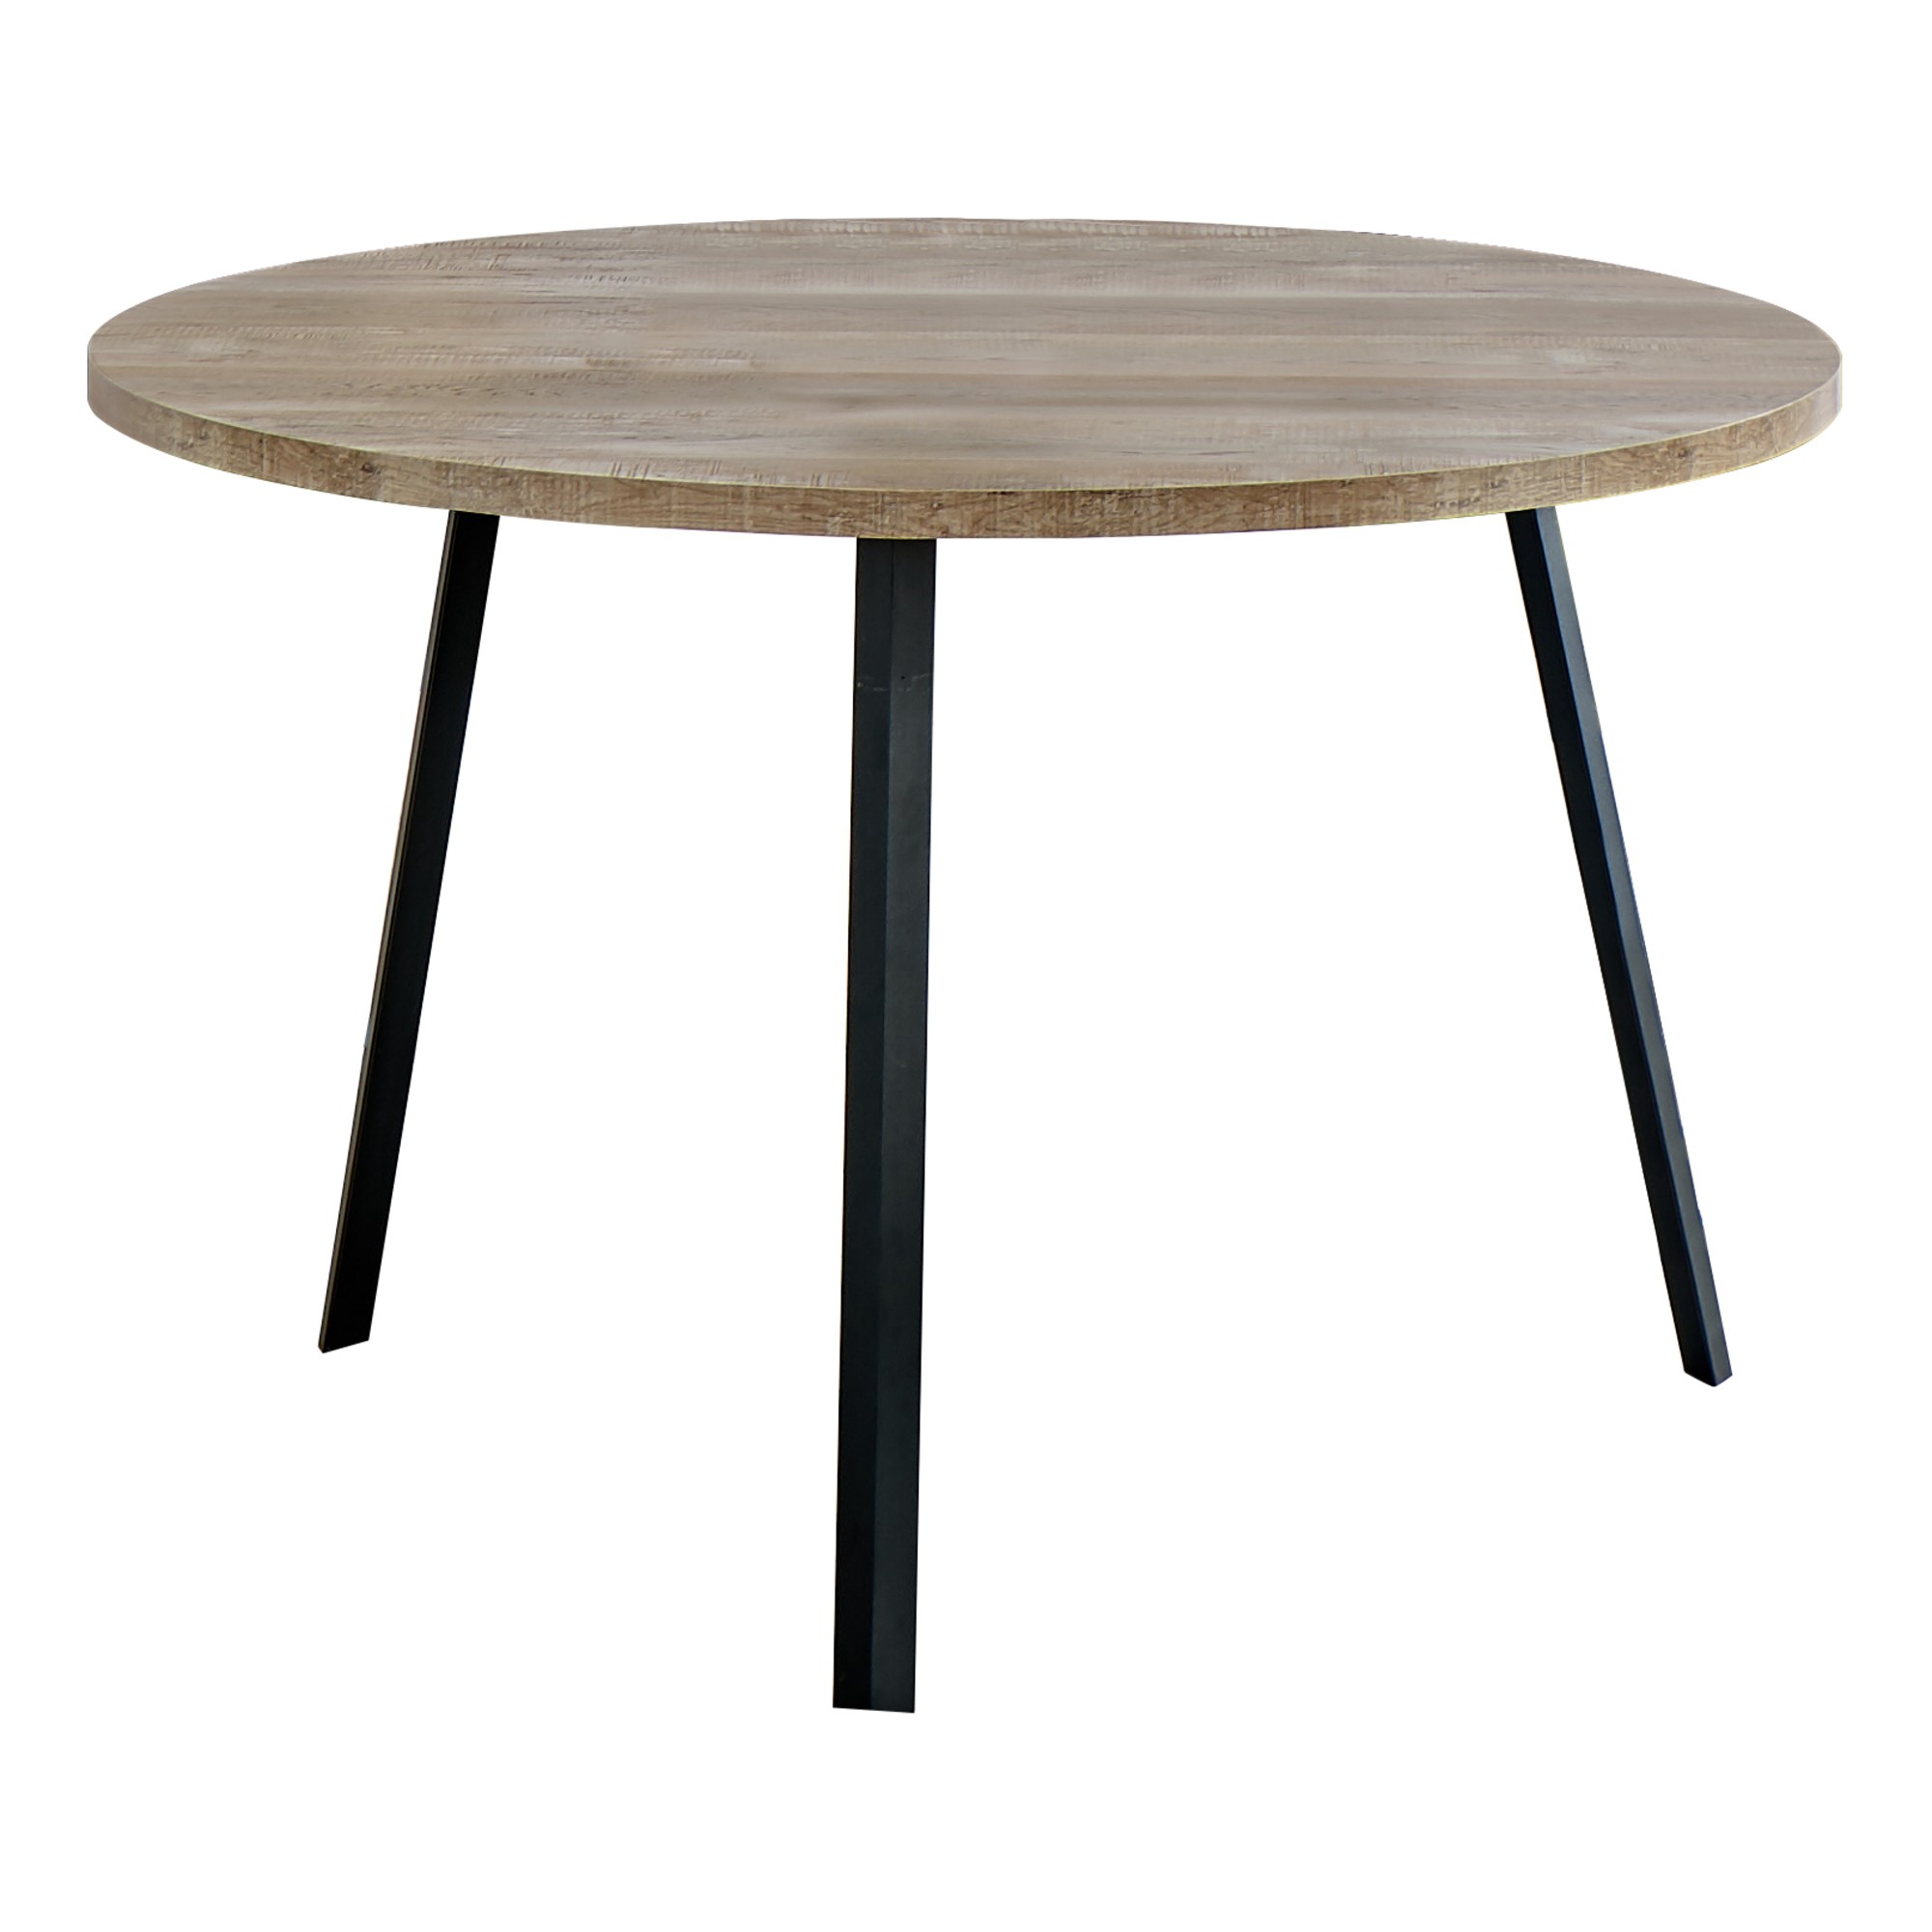 48" Round Dining Room Table with Taupe Reclaimed Wood and Black Metal